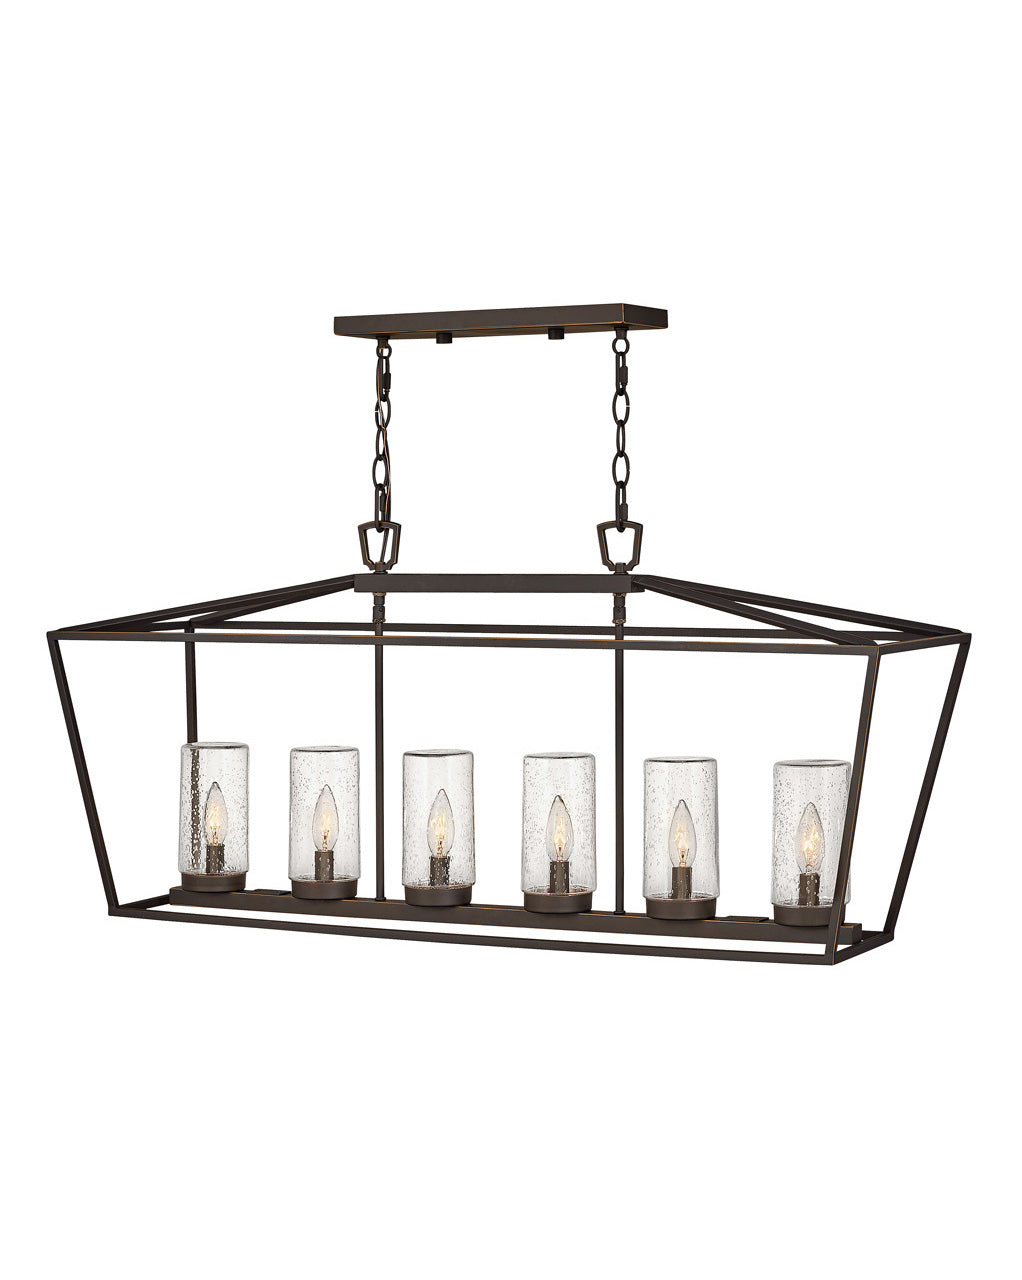 Hinkley - 2569OZ - LED Outdoor Lantern - Alford Place - Oil Rubbed Bronze